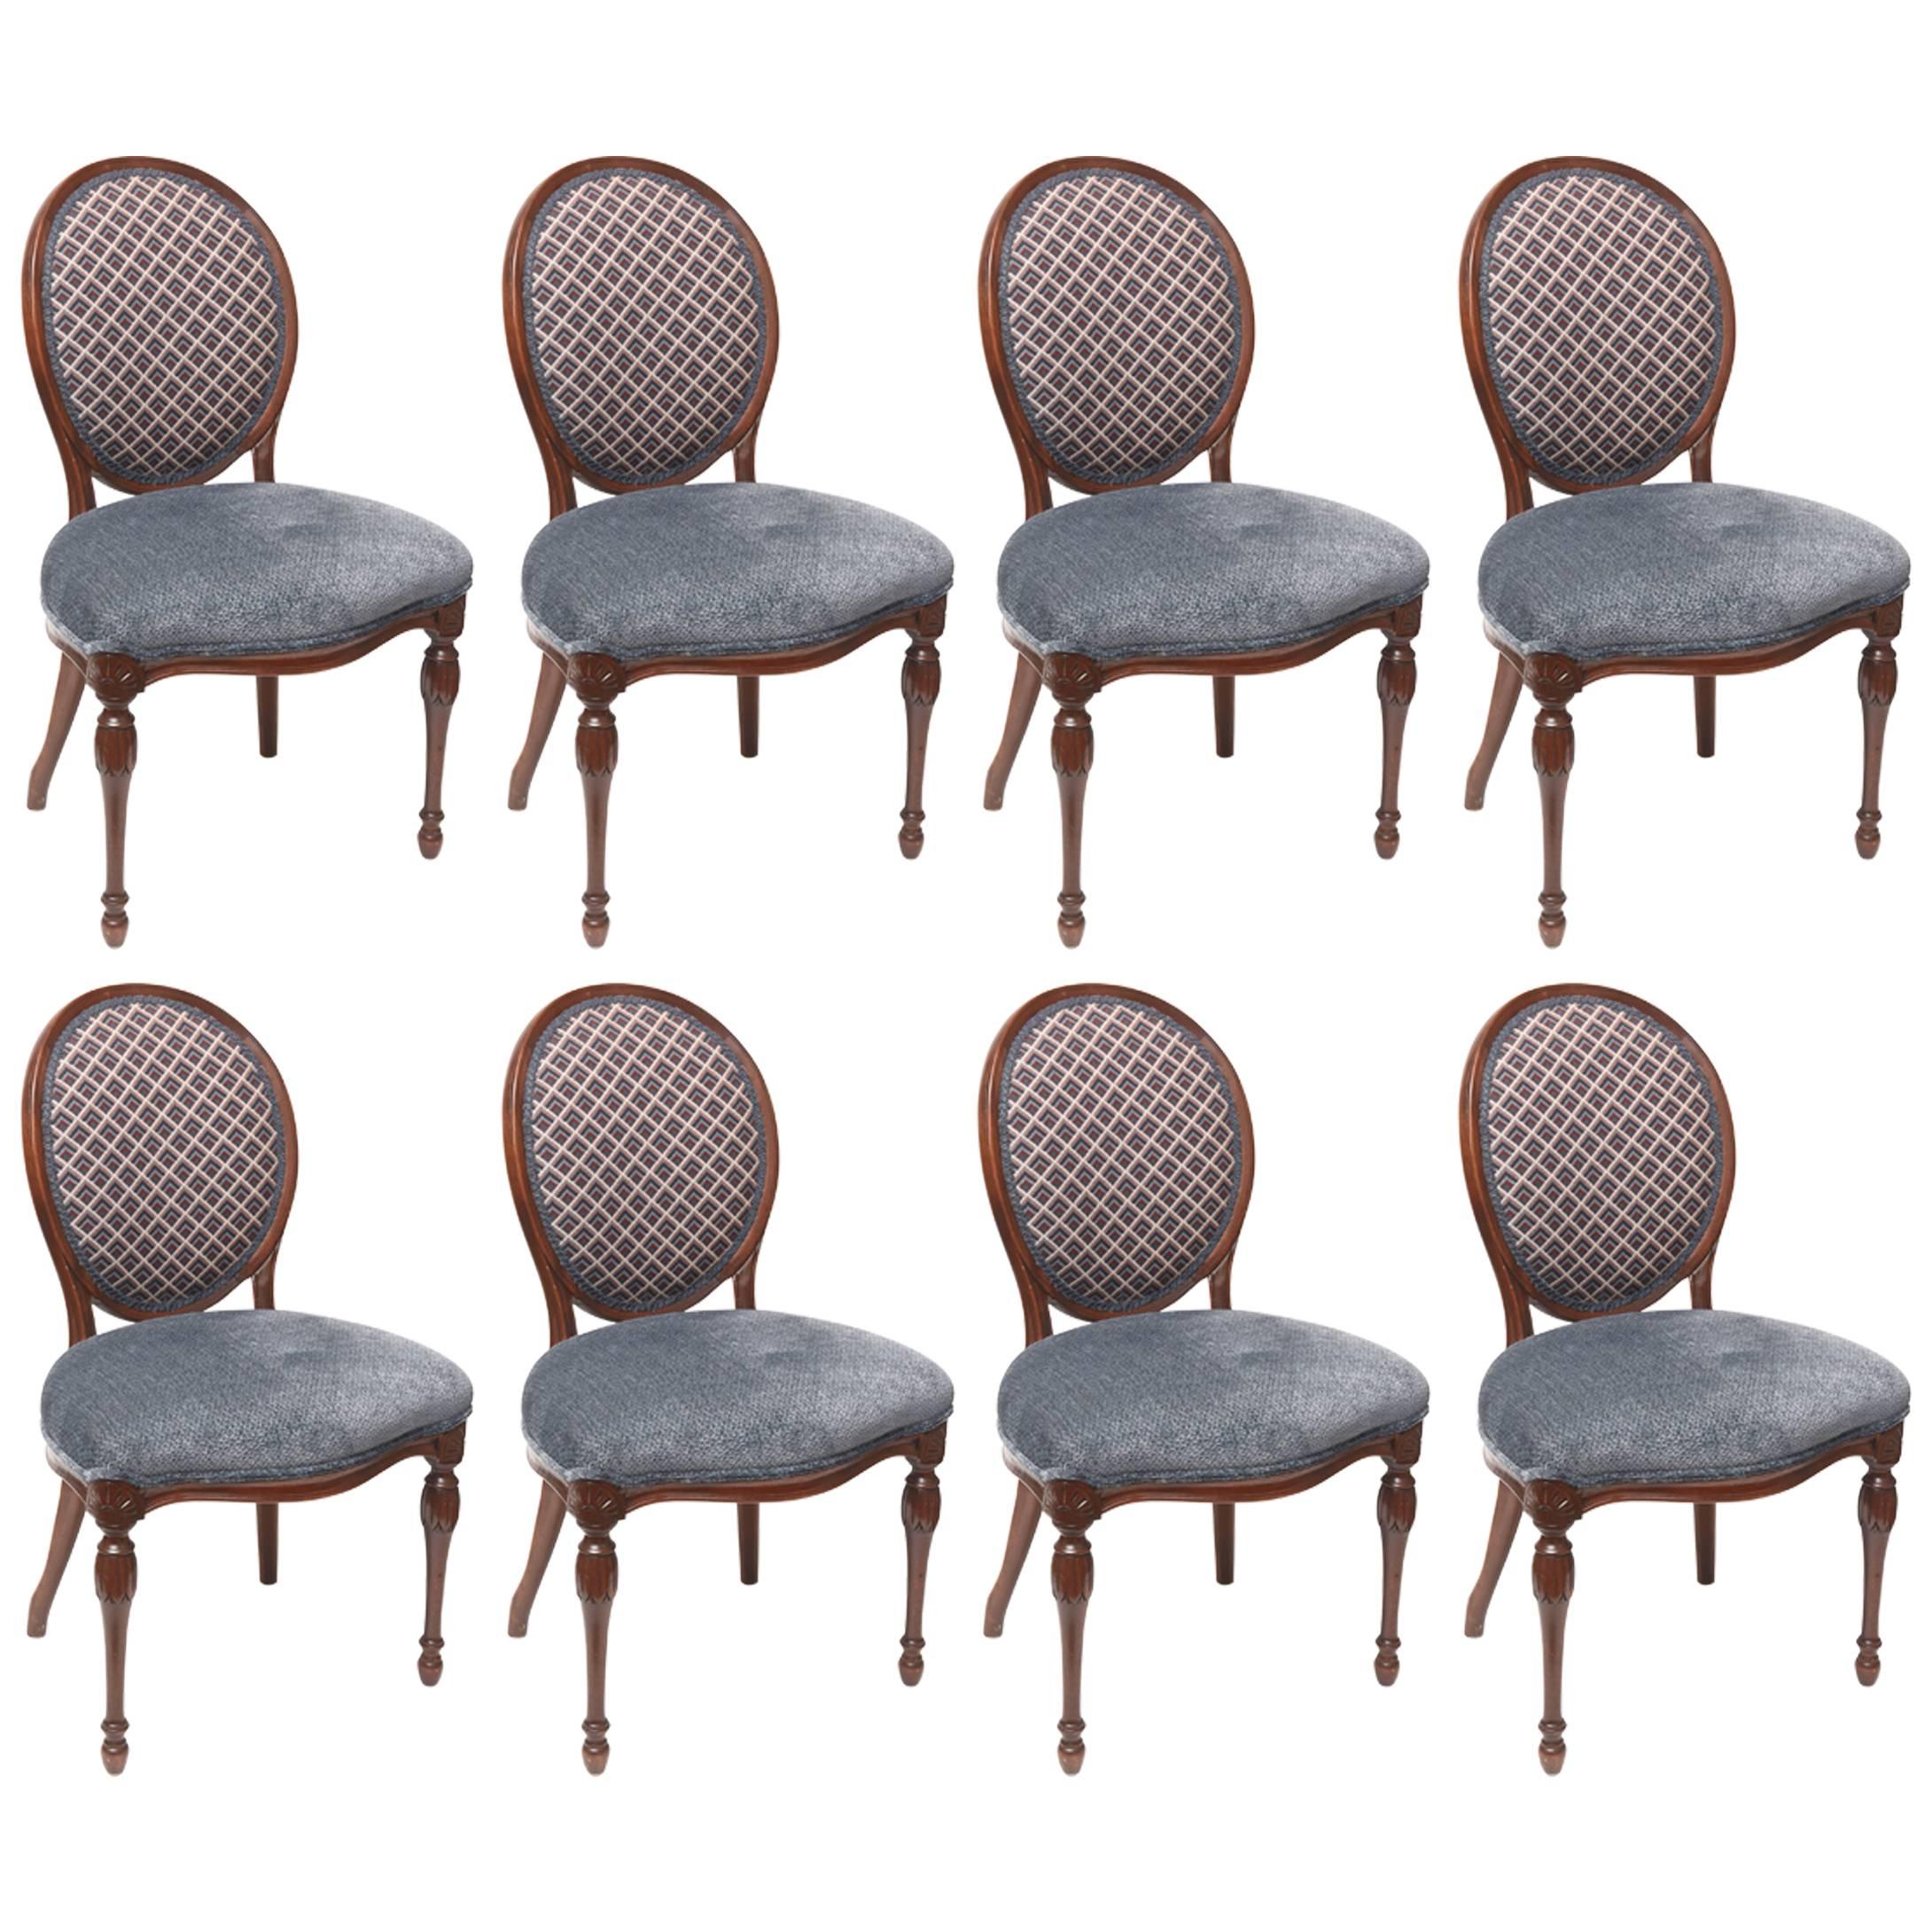 Eight Maybrook Mansion Mahogany Balloon Back Dining Chairs, Nicely Carved Legs